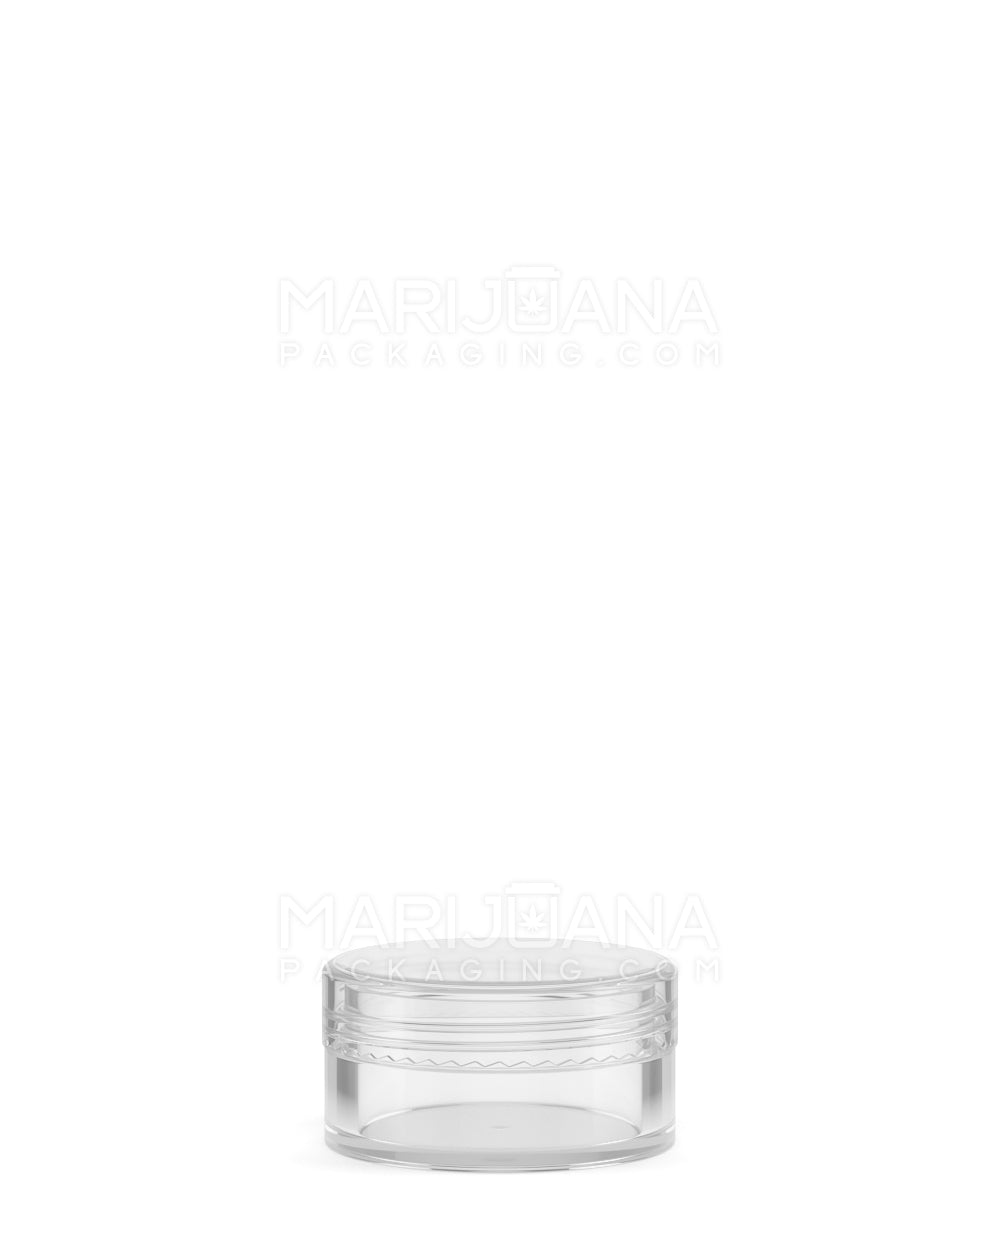 Clear Concentrate Containers w/ Screw Top Cap | 5mL - Plastic - 250 Count - 2